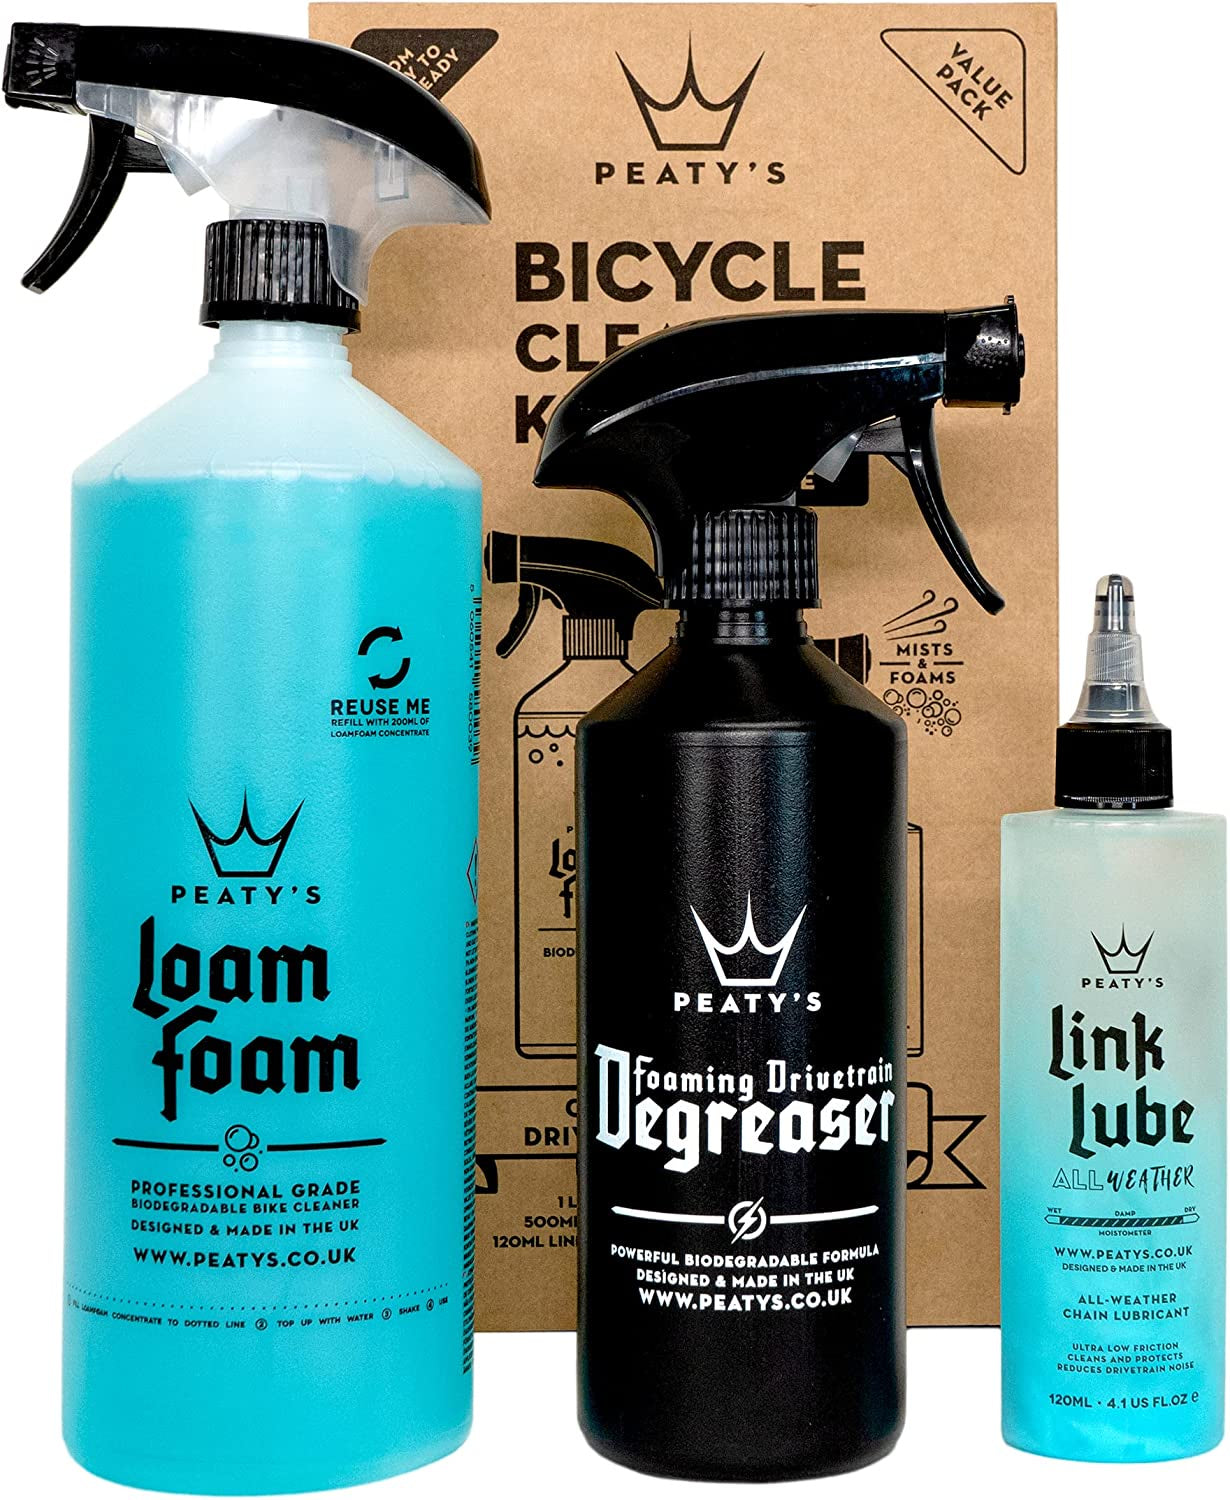 Peaty's Clean Degreaser Lube Gift Pack